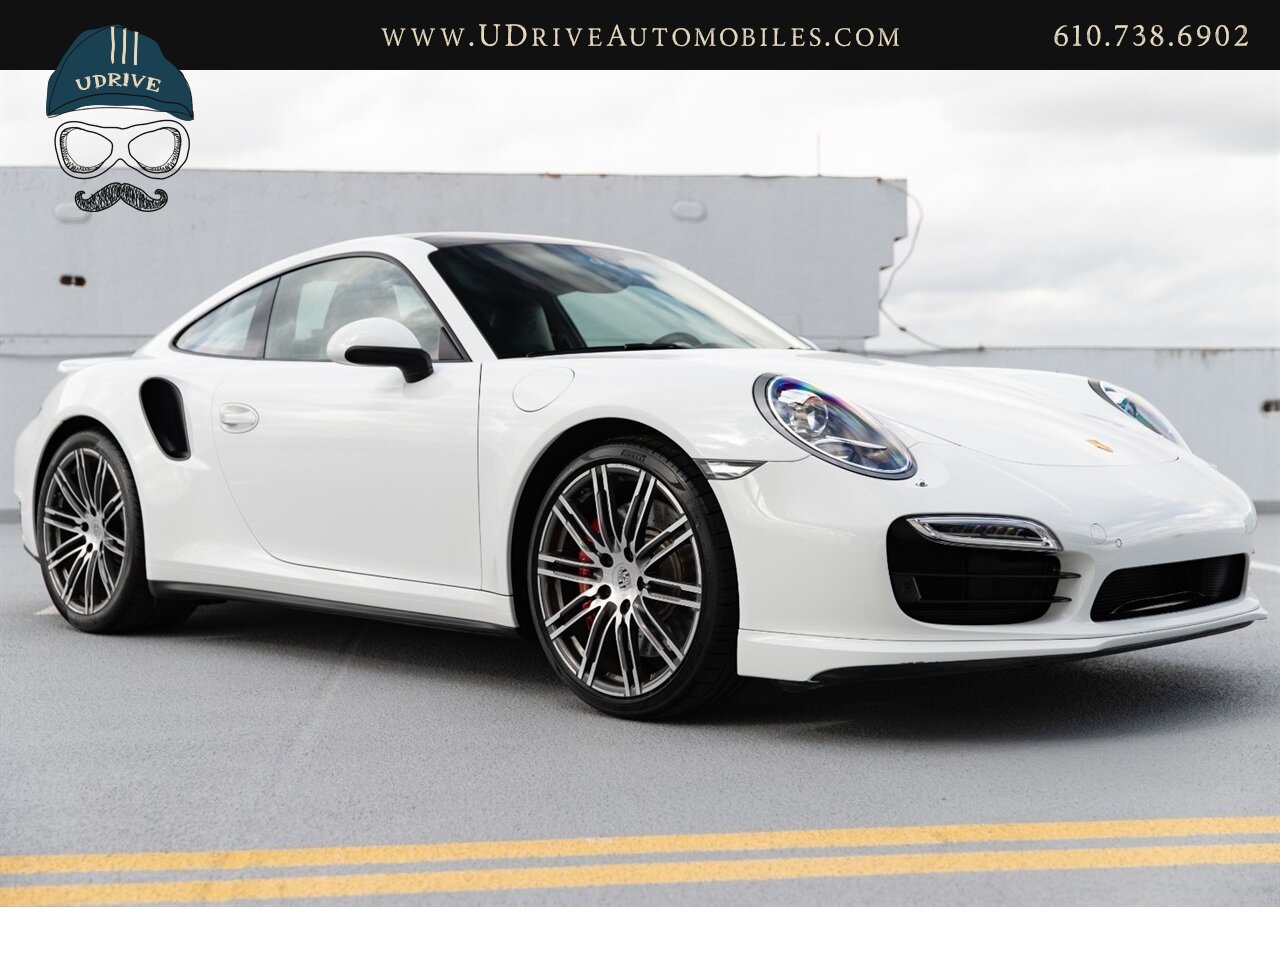 2014 Porsche 911 Turbo 12k Miles White over Black Chrono Rear Wiper  Sport Seats 20in Turbo Whls Sunroof Red Belts - Photo 13 - West Chester, PA 19382